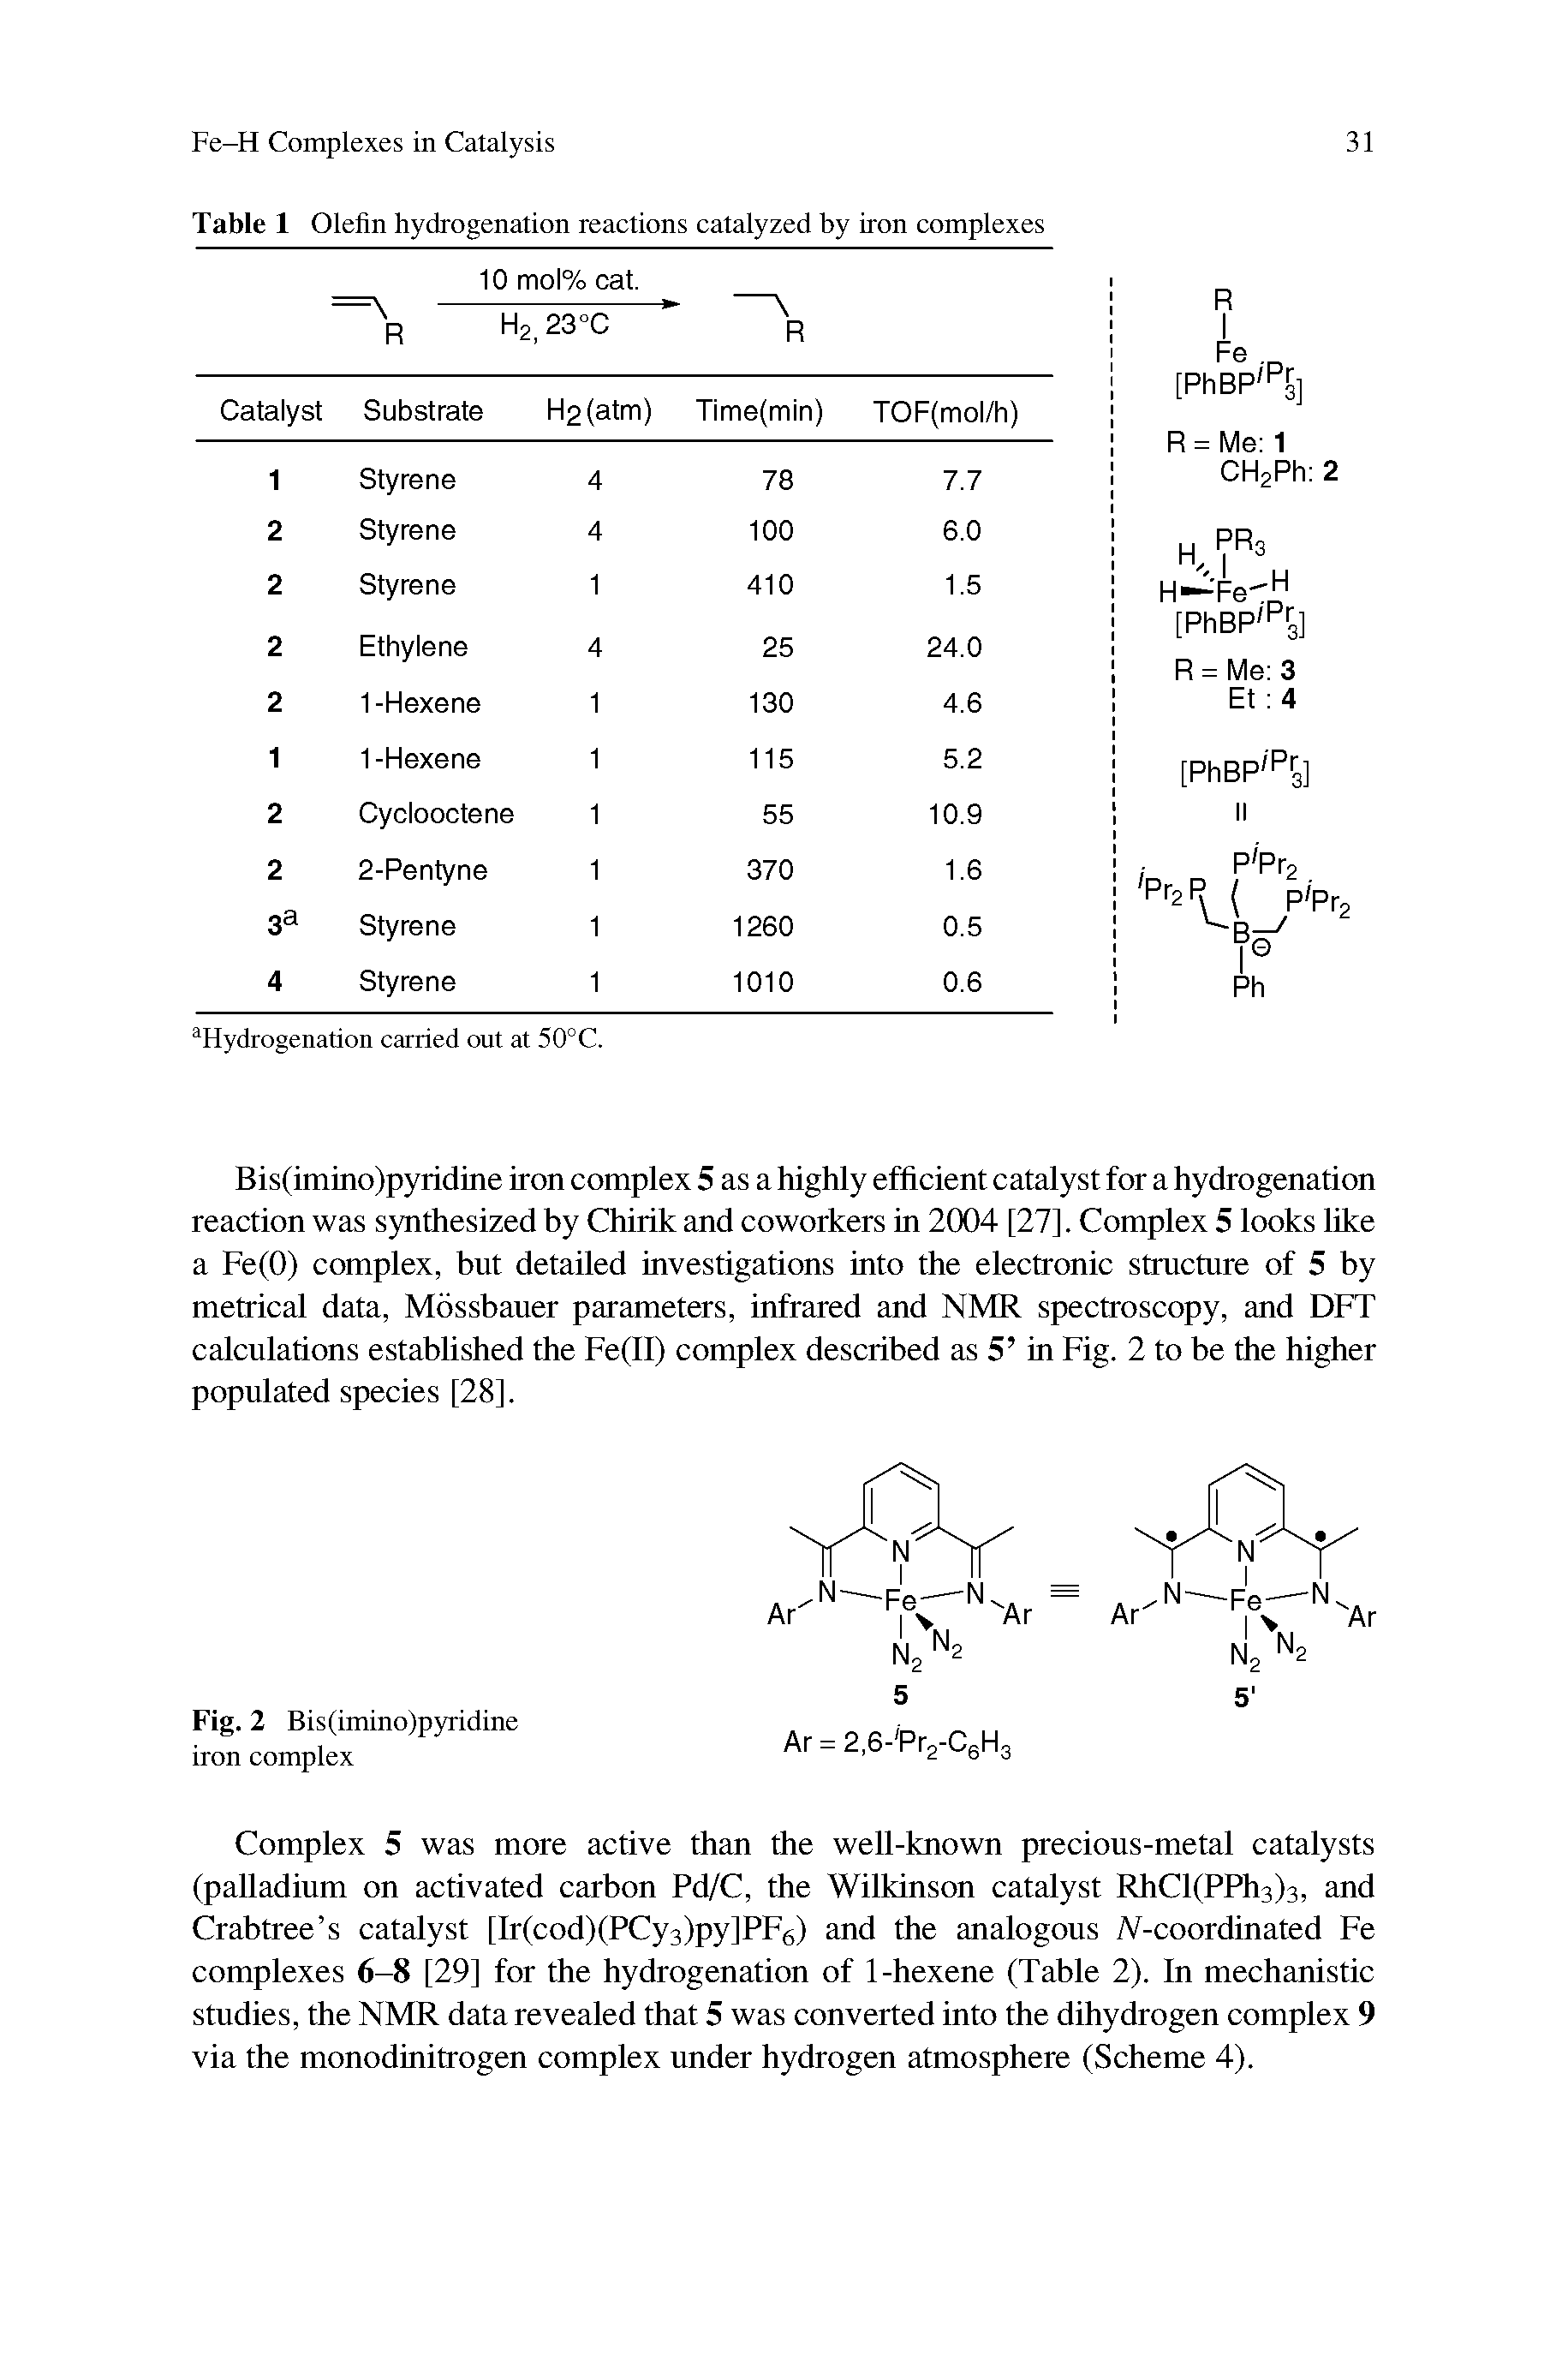 Table 1 Olefin hydrogenation reactions catalyzed by iron complexes...